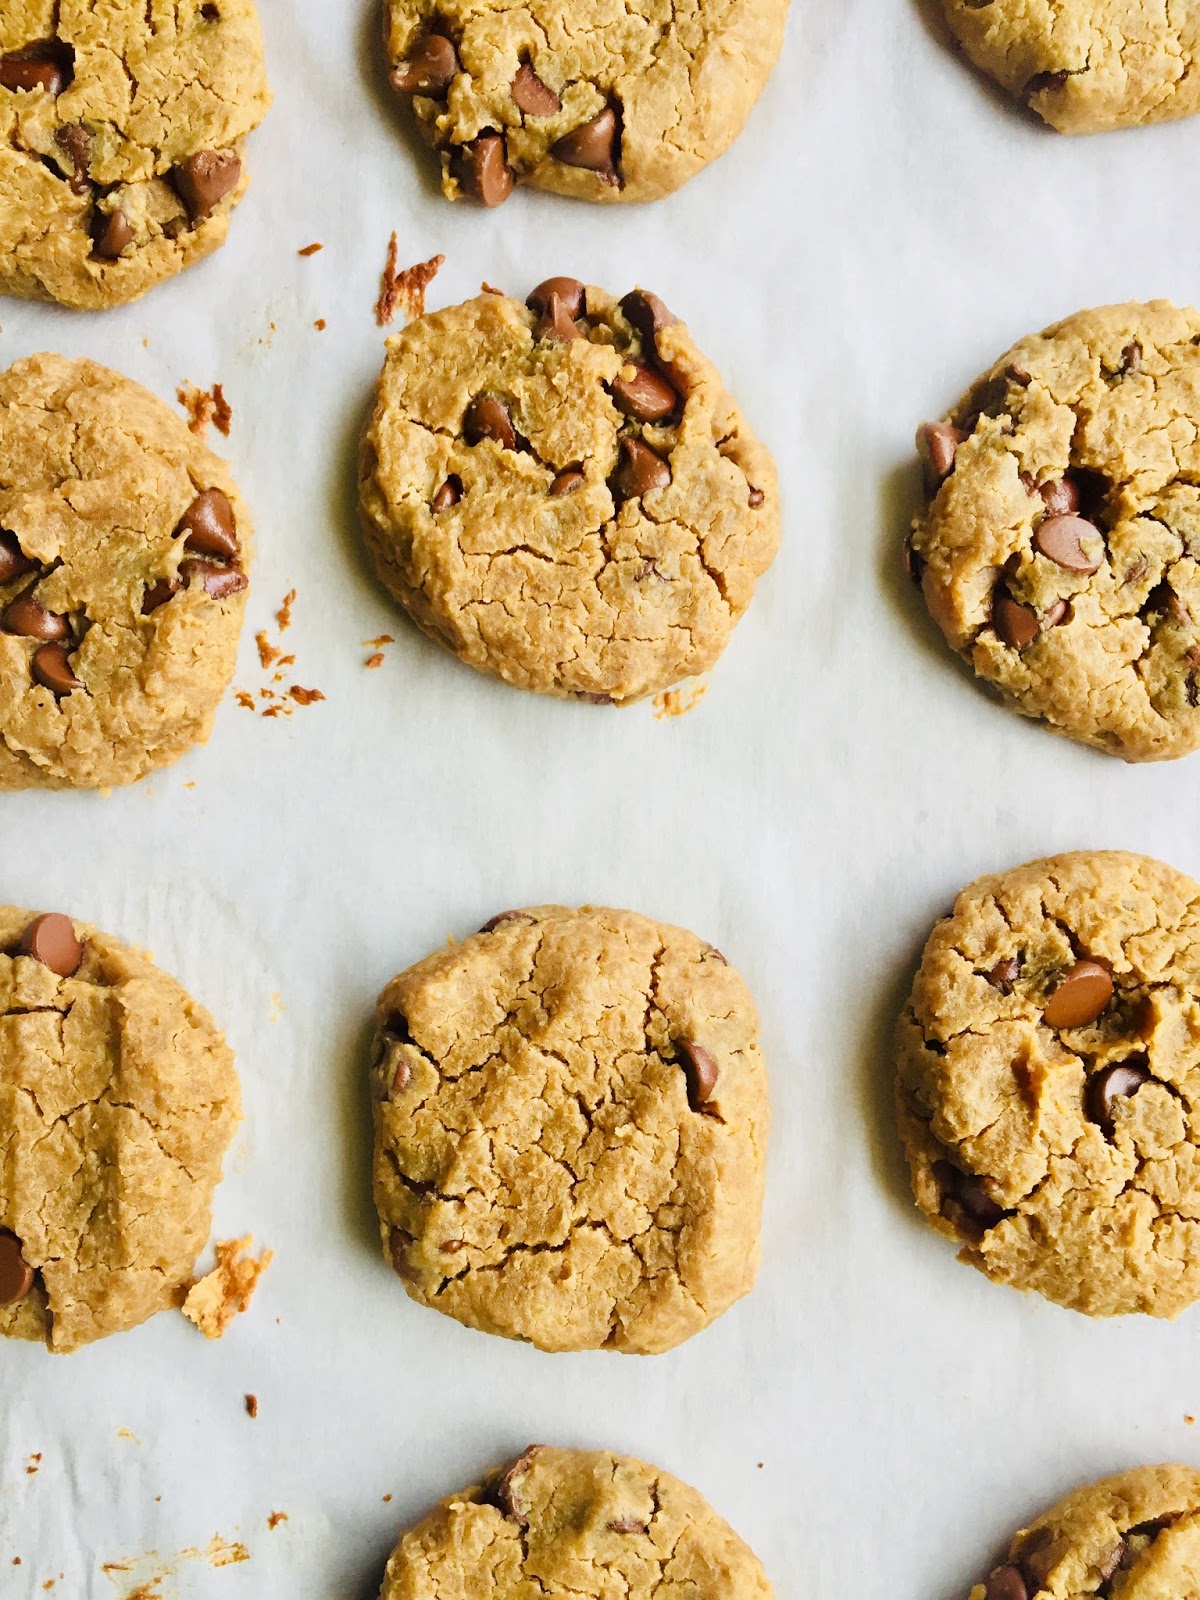 Healthy Chickpea Gluten Free Eggless Chocolate Chip Cookies